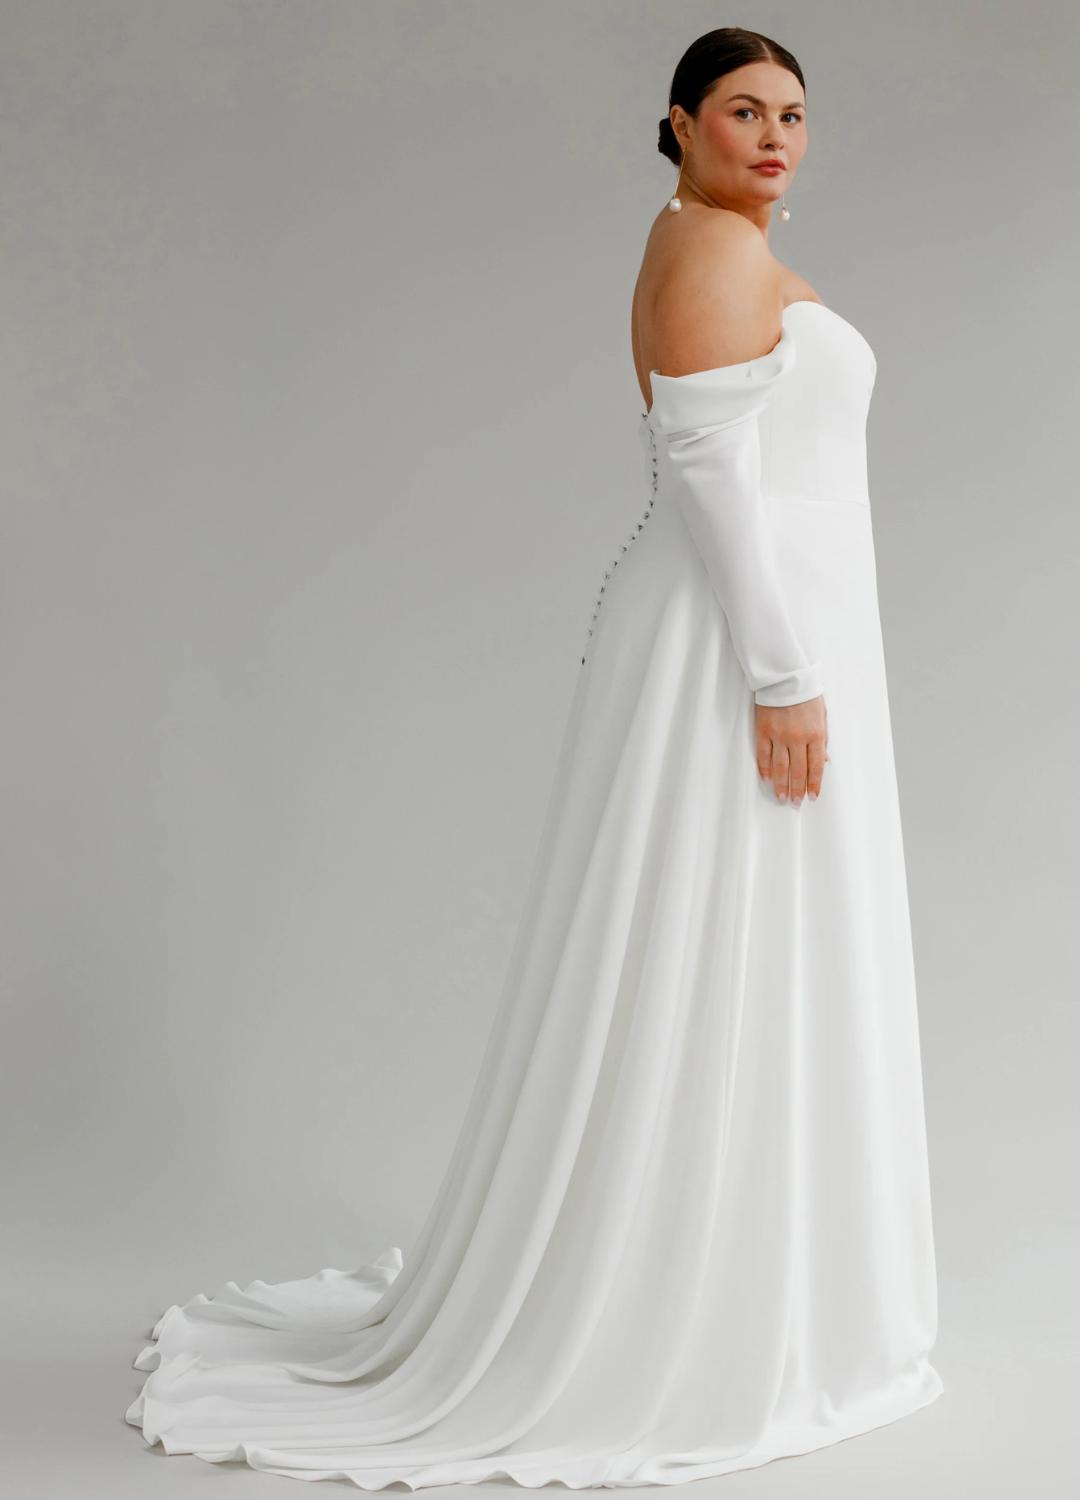 Shop Simple Wedding Dresses in Auckland | Dell'Amore Bridal